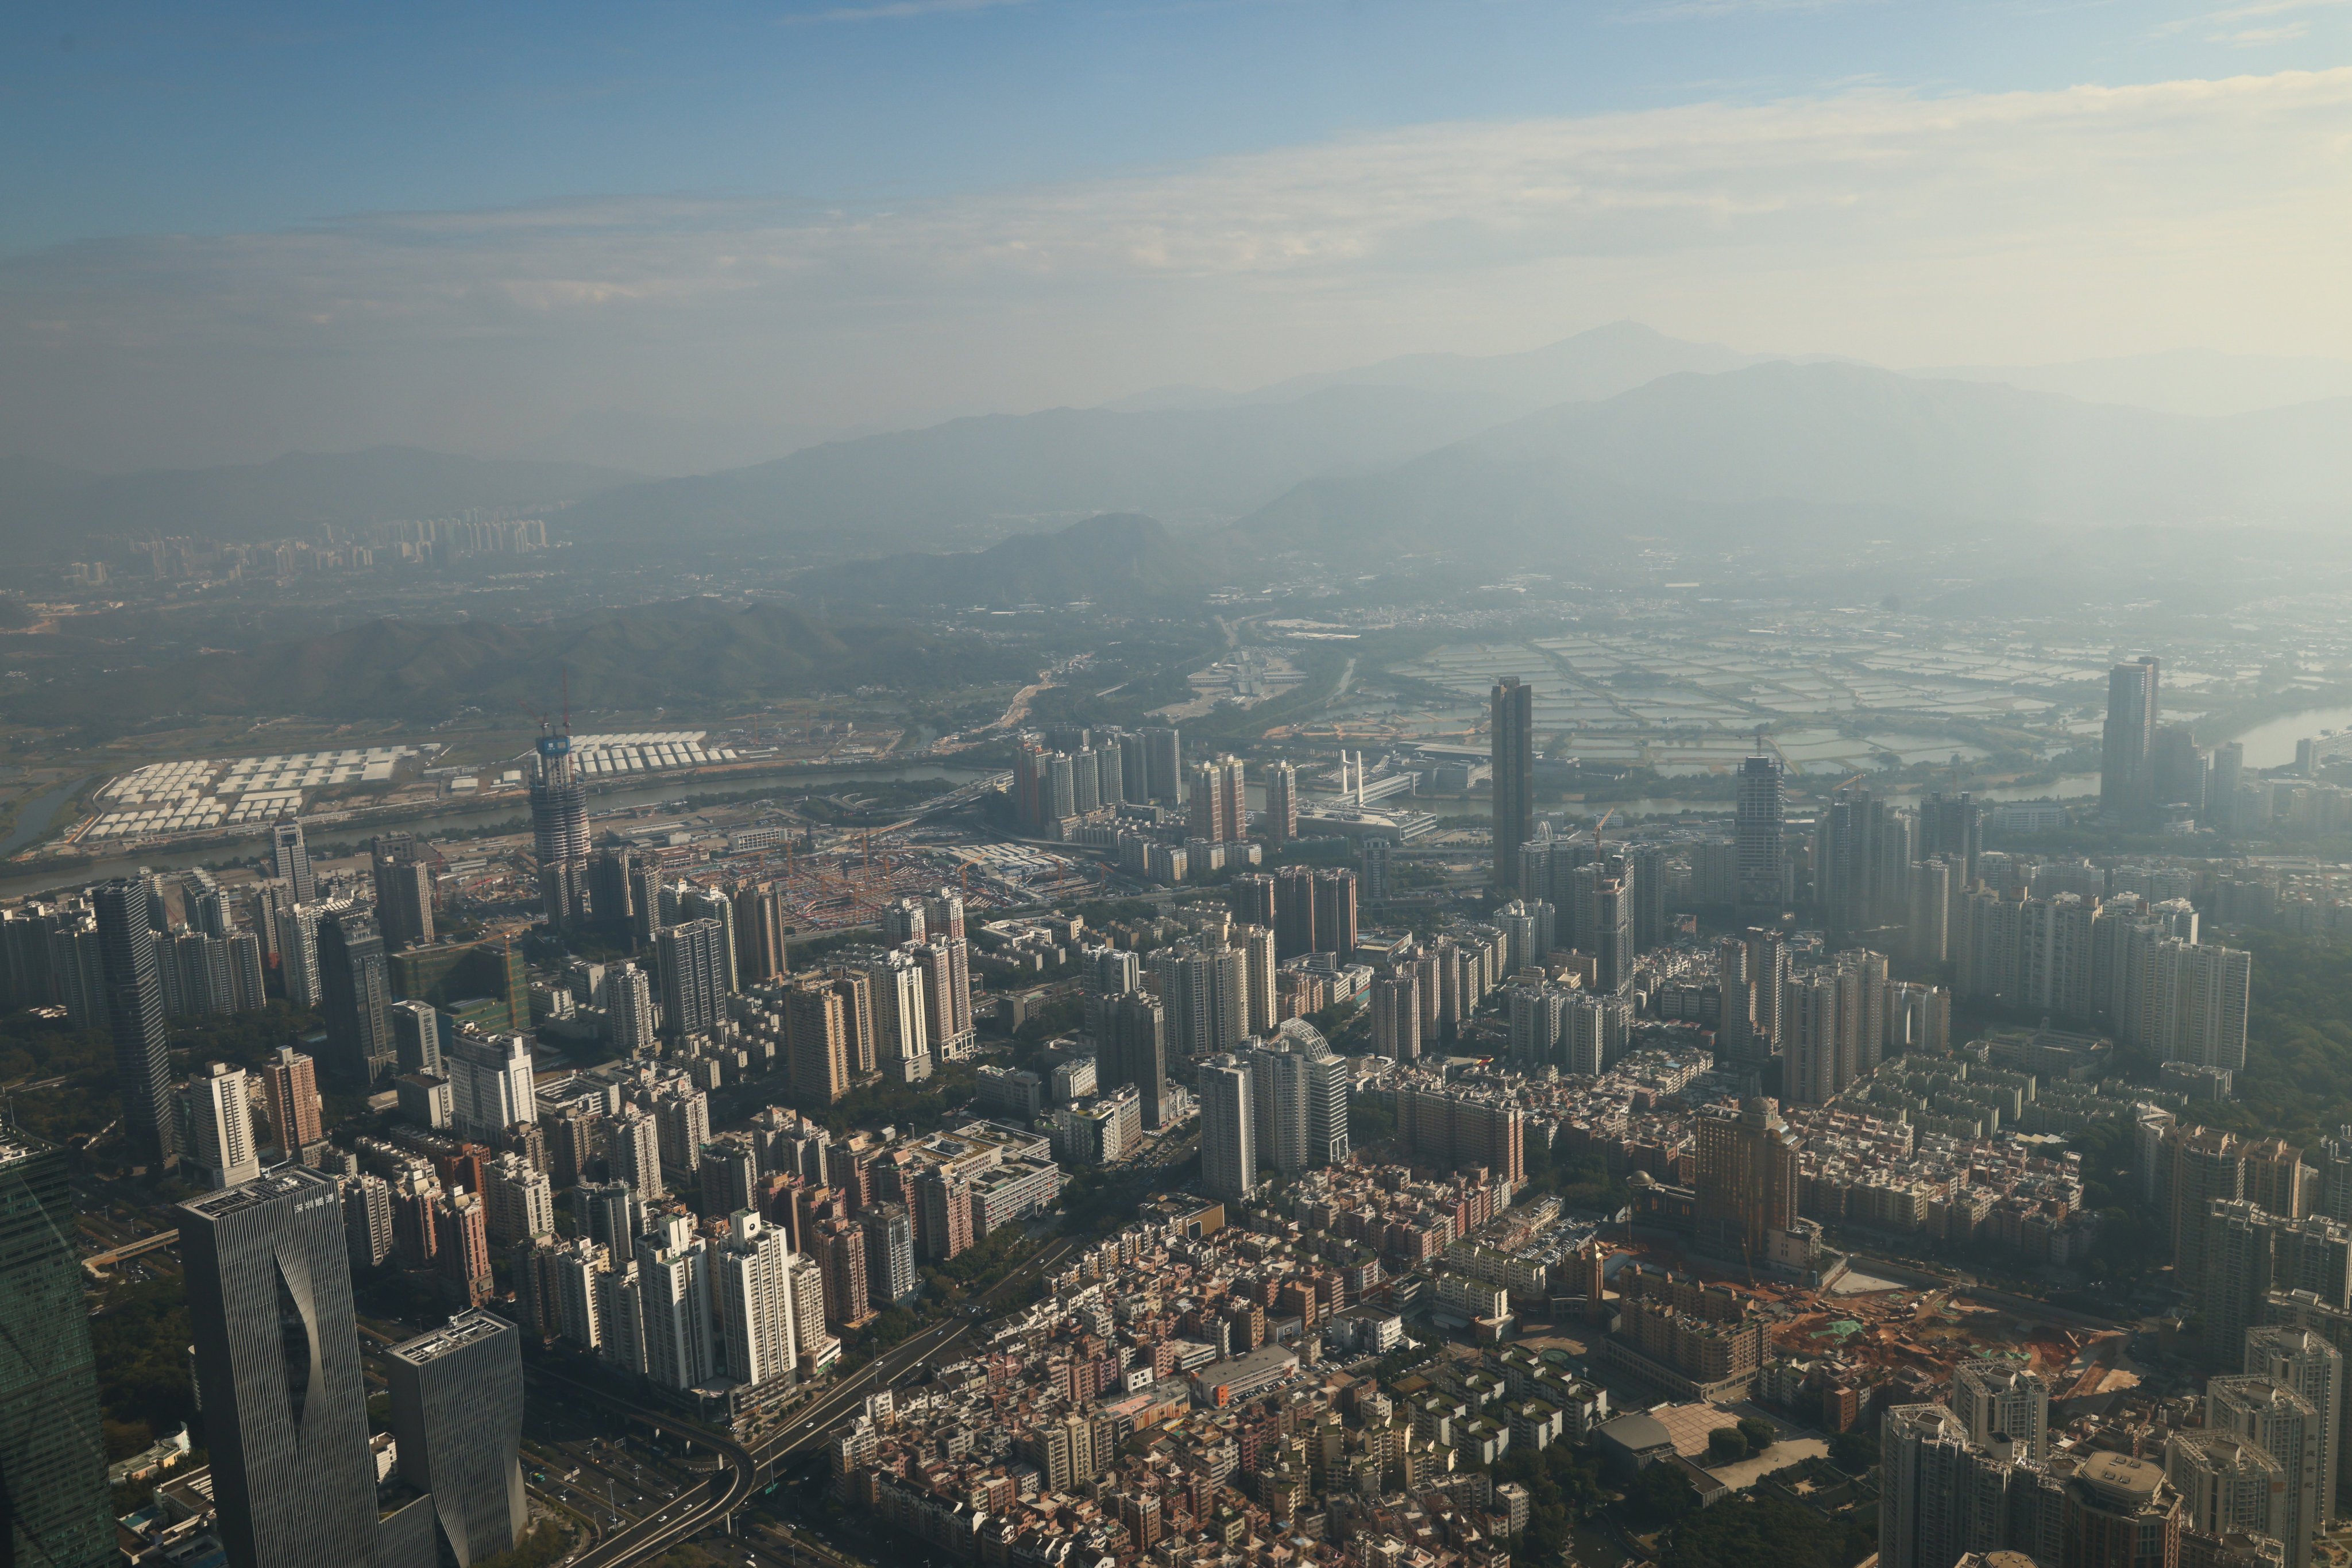 Shenzhen lowered the thresholds for the personal income tax and social insurance payments of non-locals seeking to buy a property in certain districts. Photo: Dickson Lee